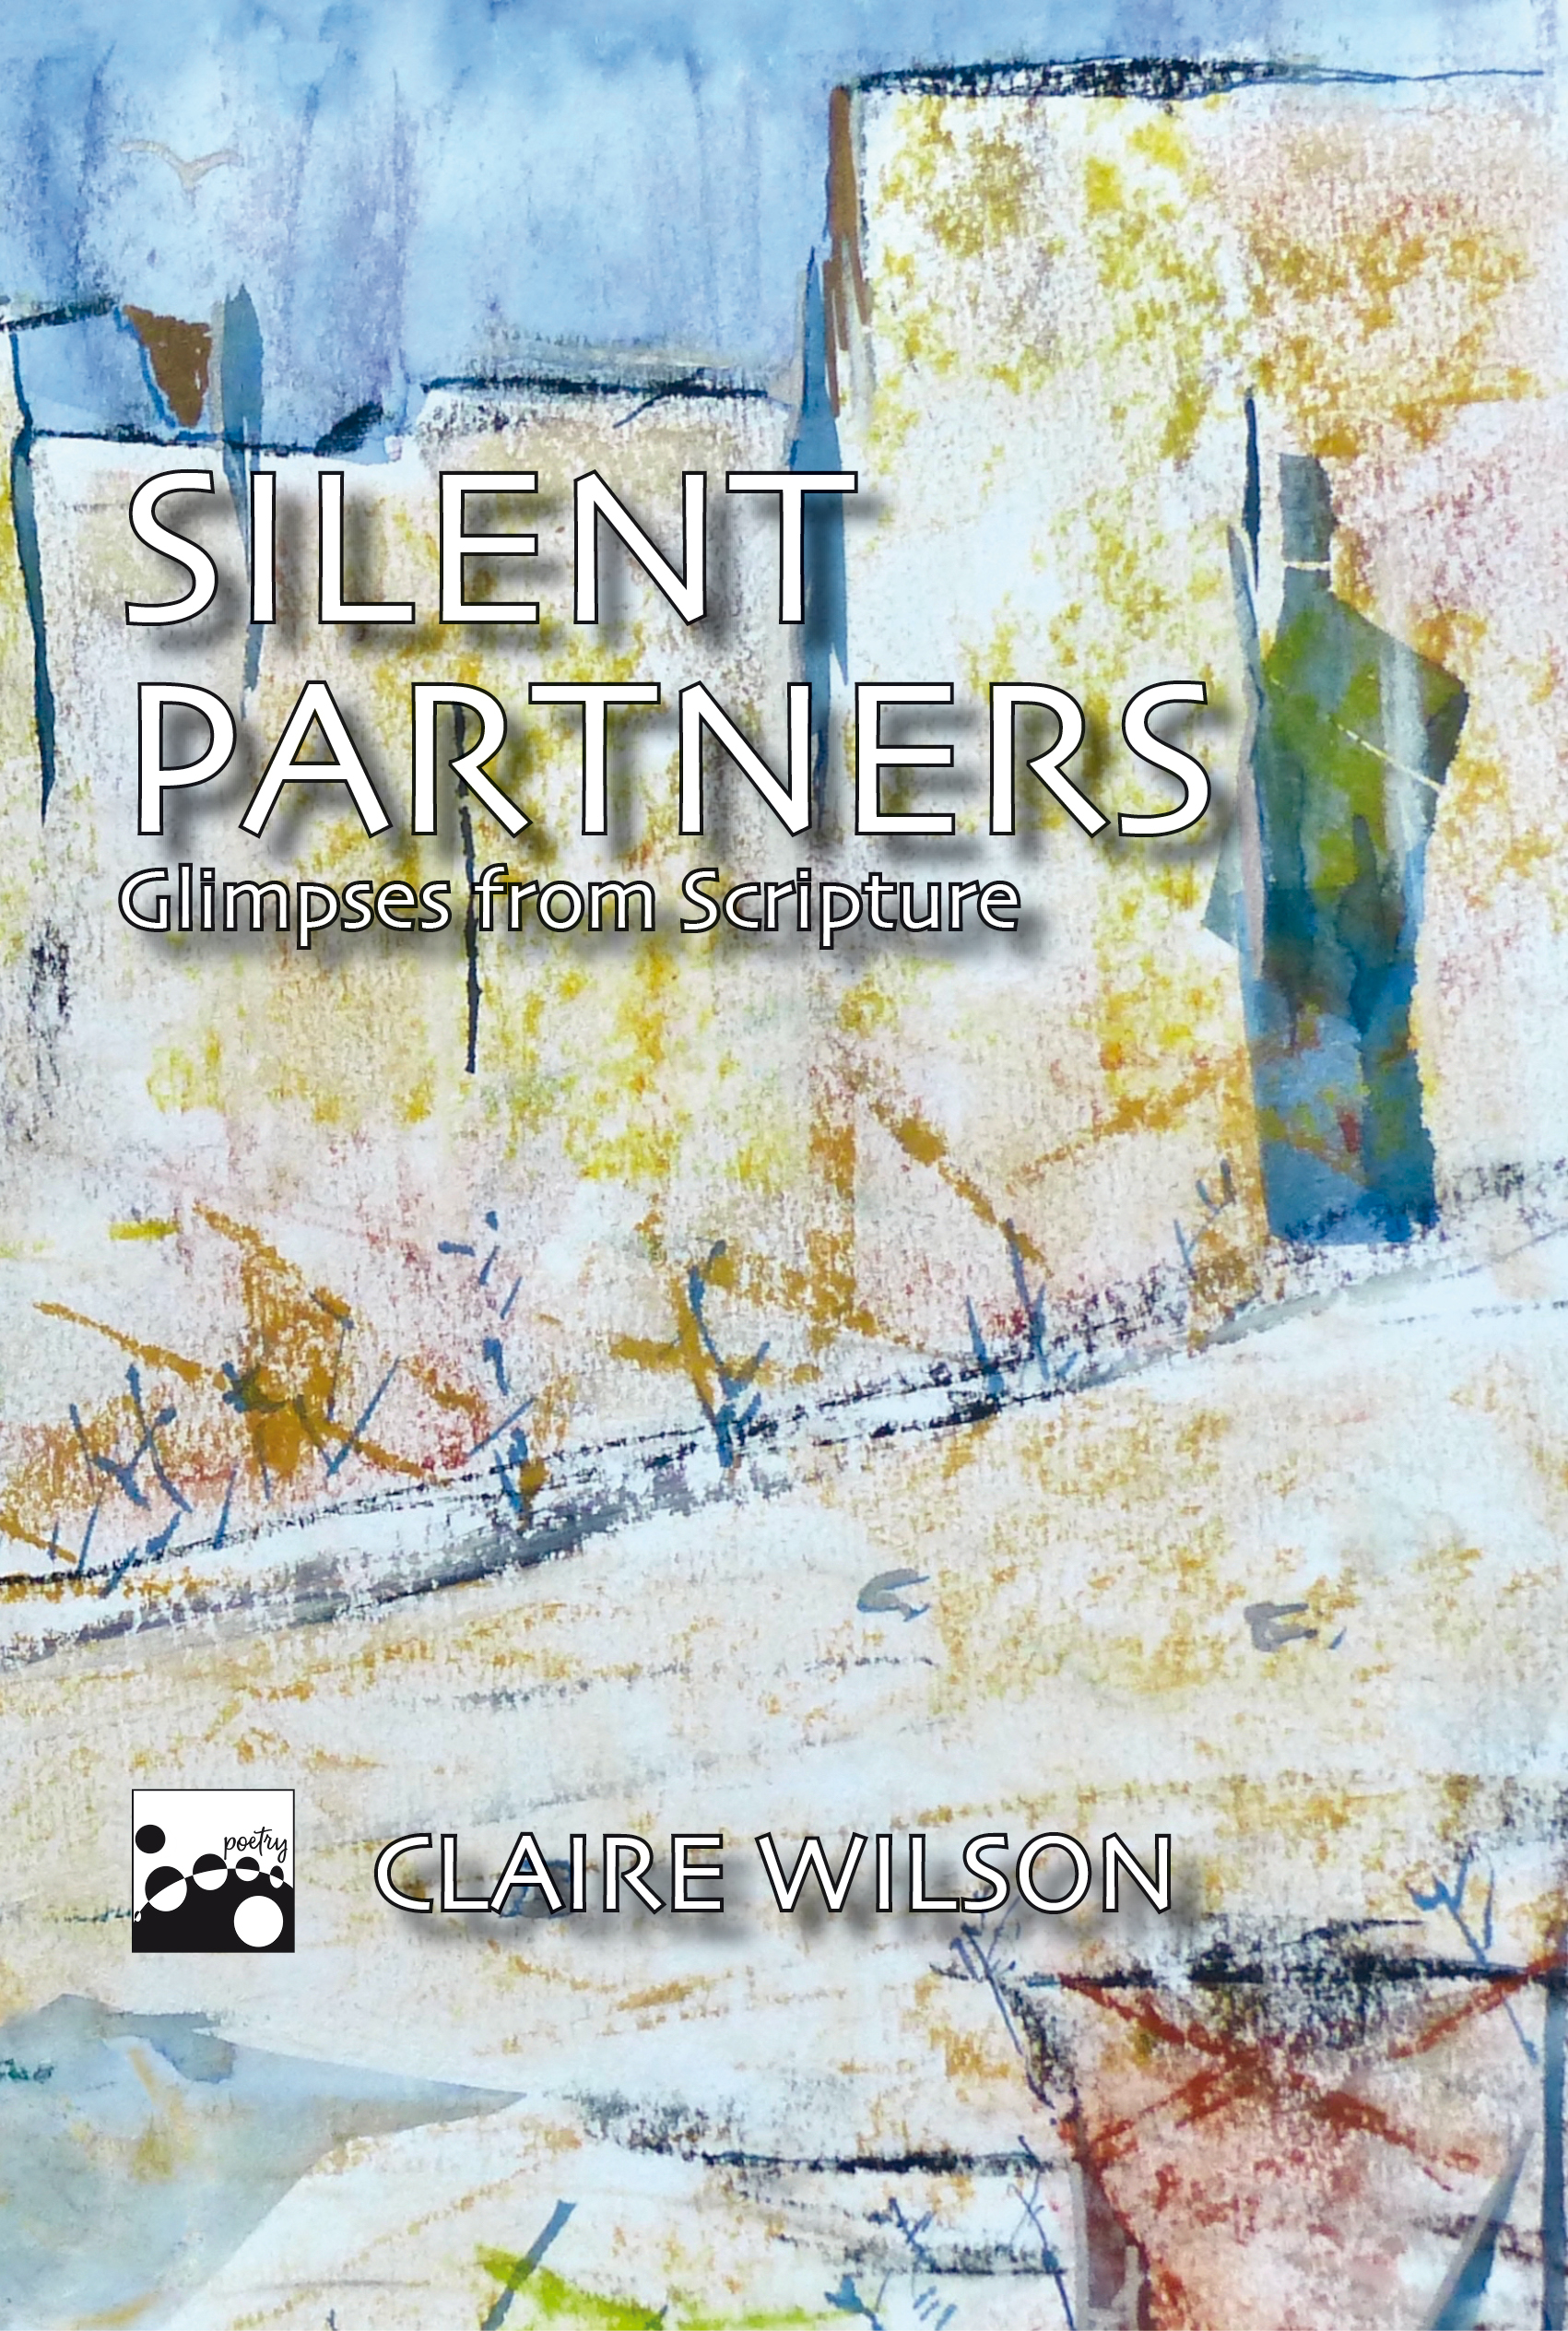 SILENT PARTNERS Glimpses from Scripture